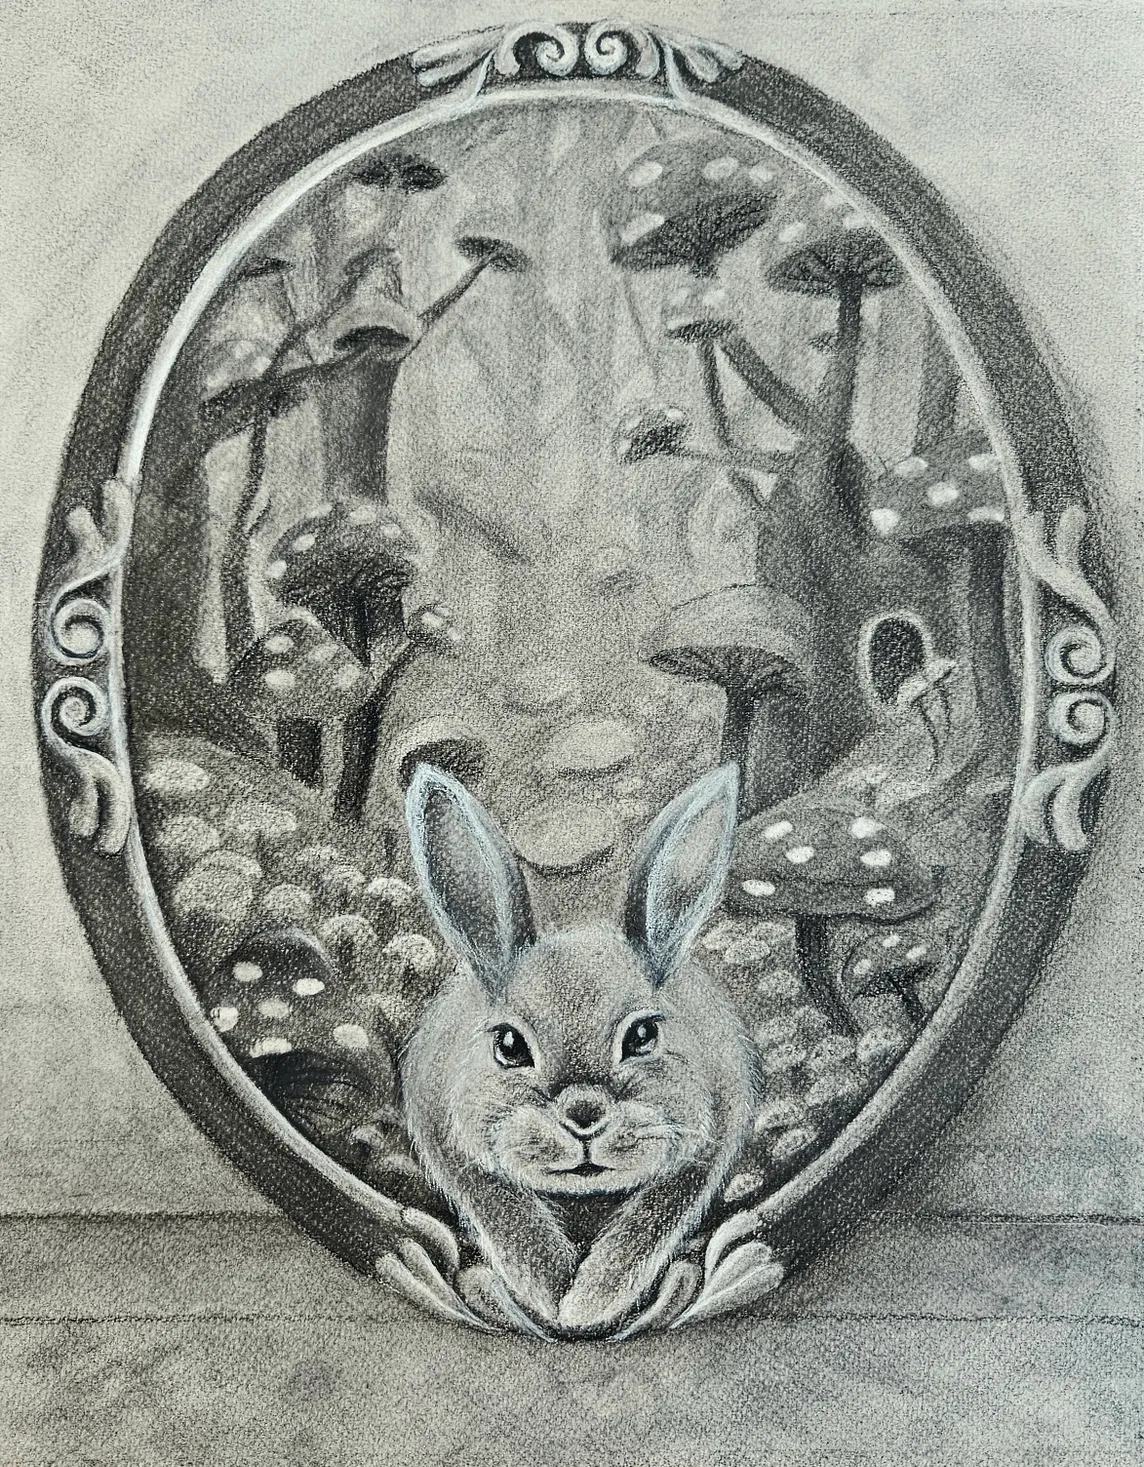 First Charcoal Drawing: Mirror to Childhood Dreams